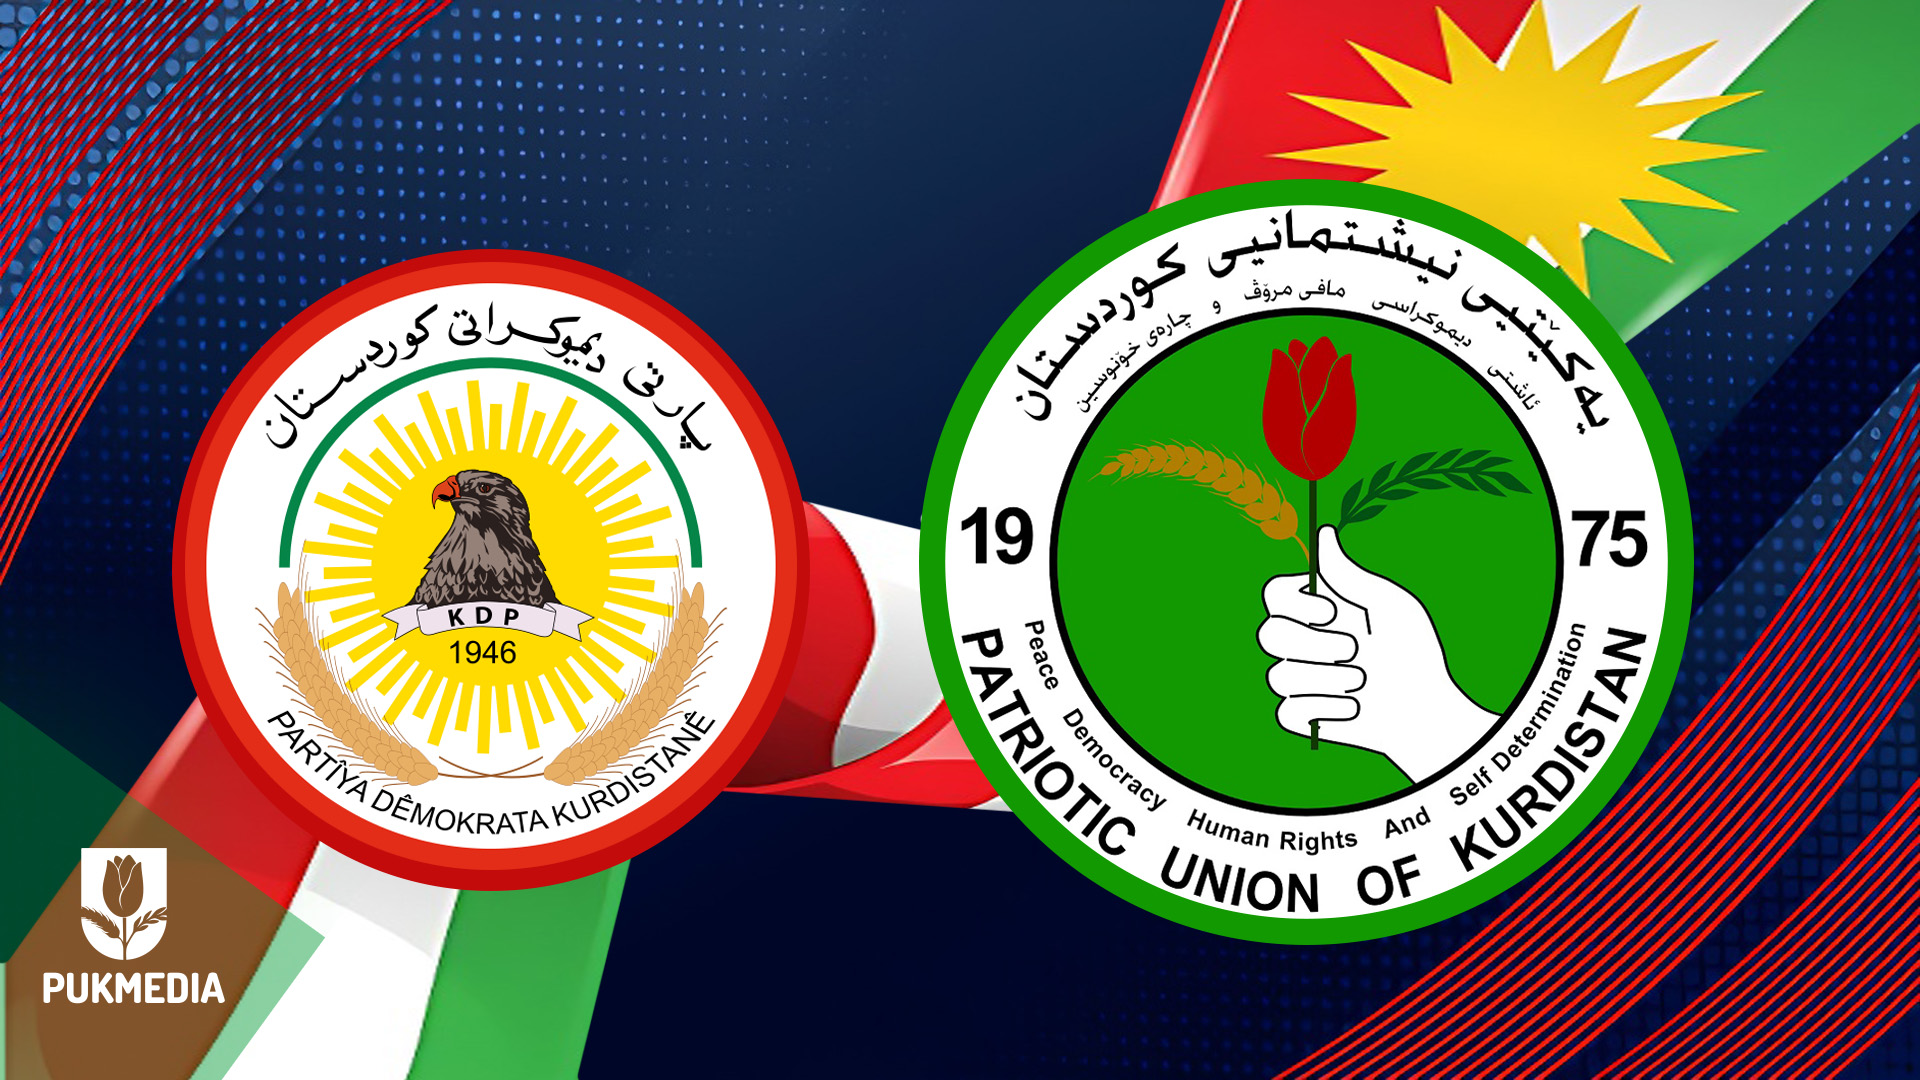  PUK logo on the right and KDP logo on the left.